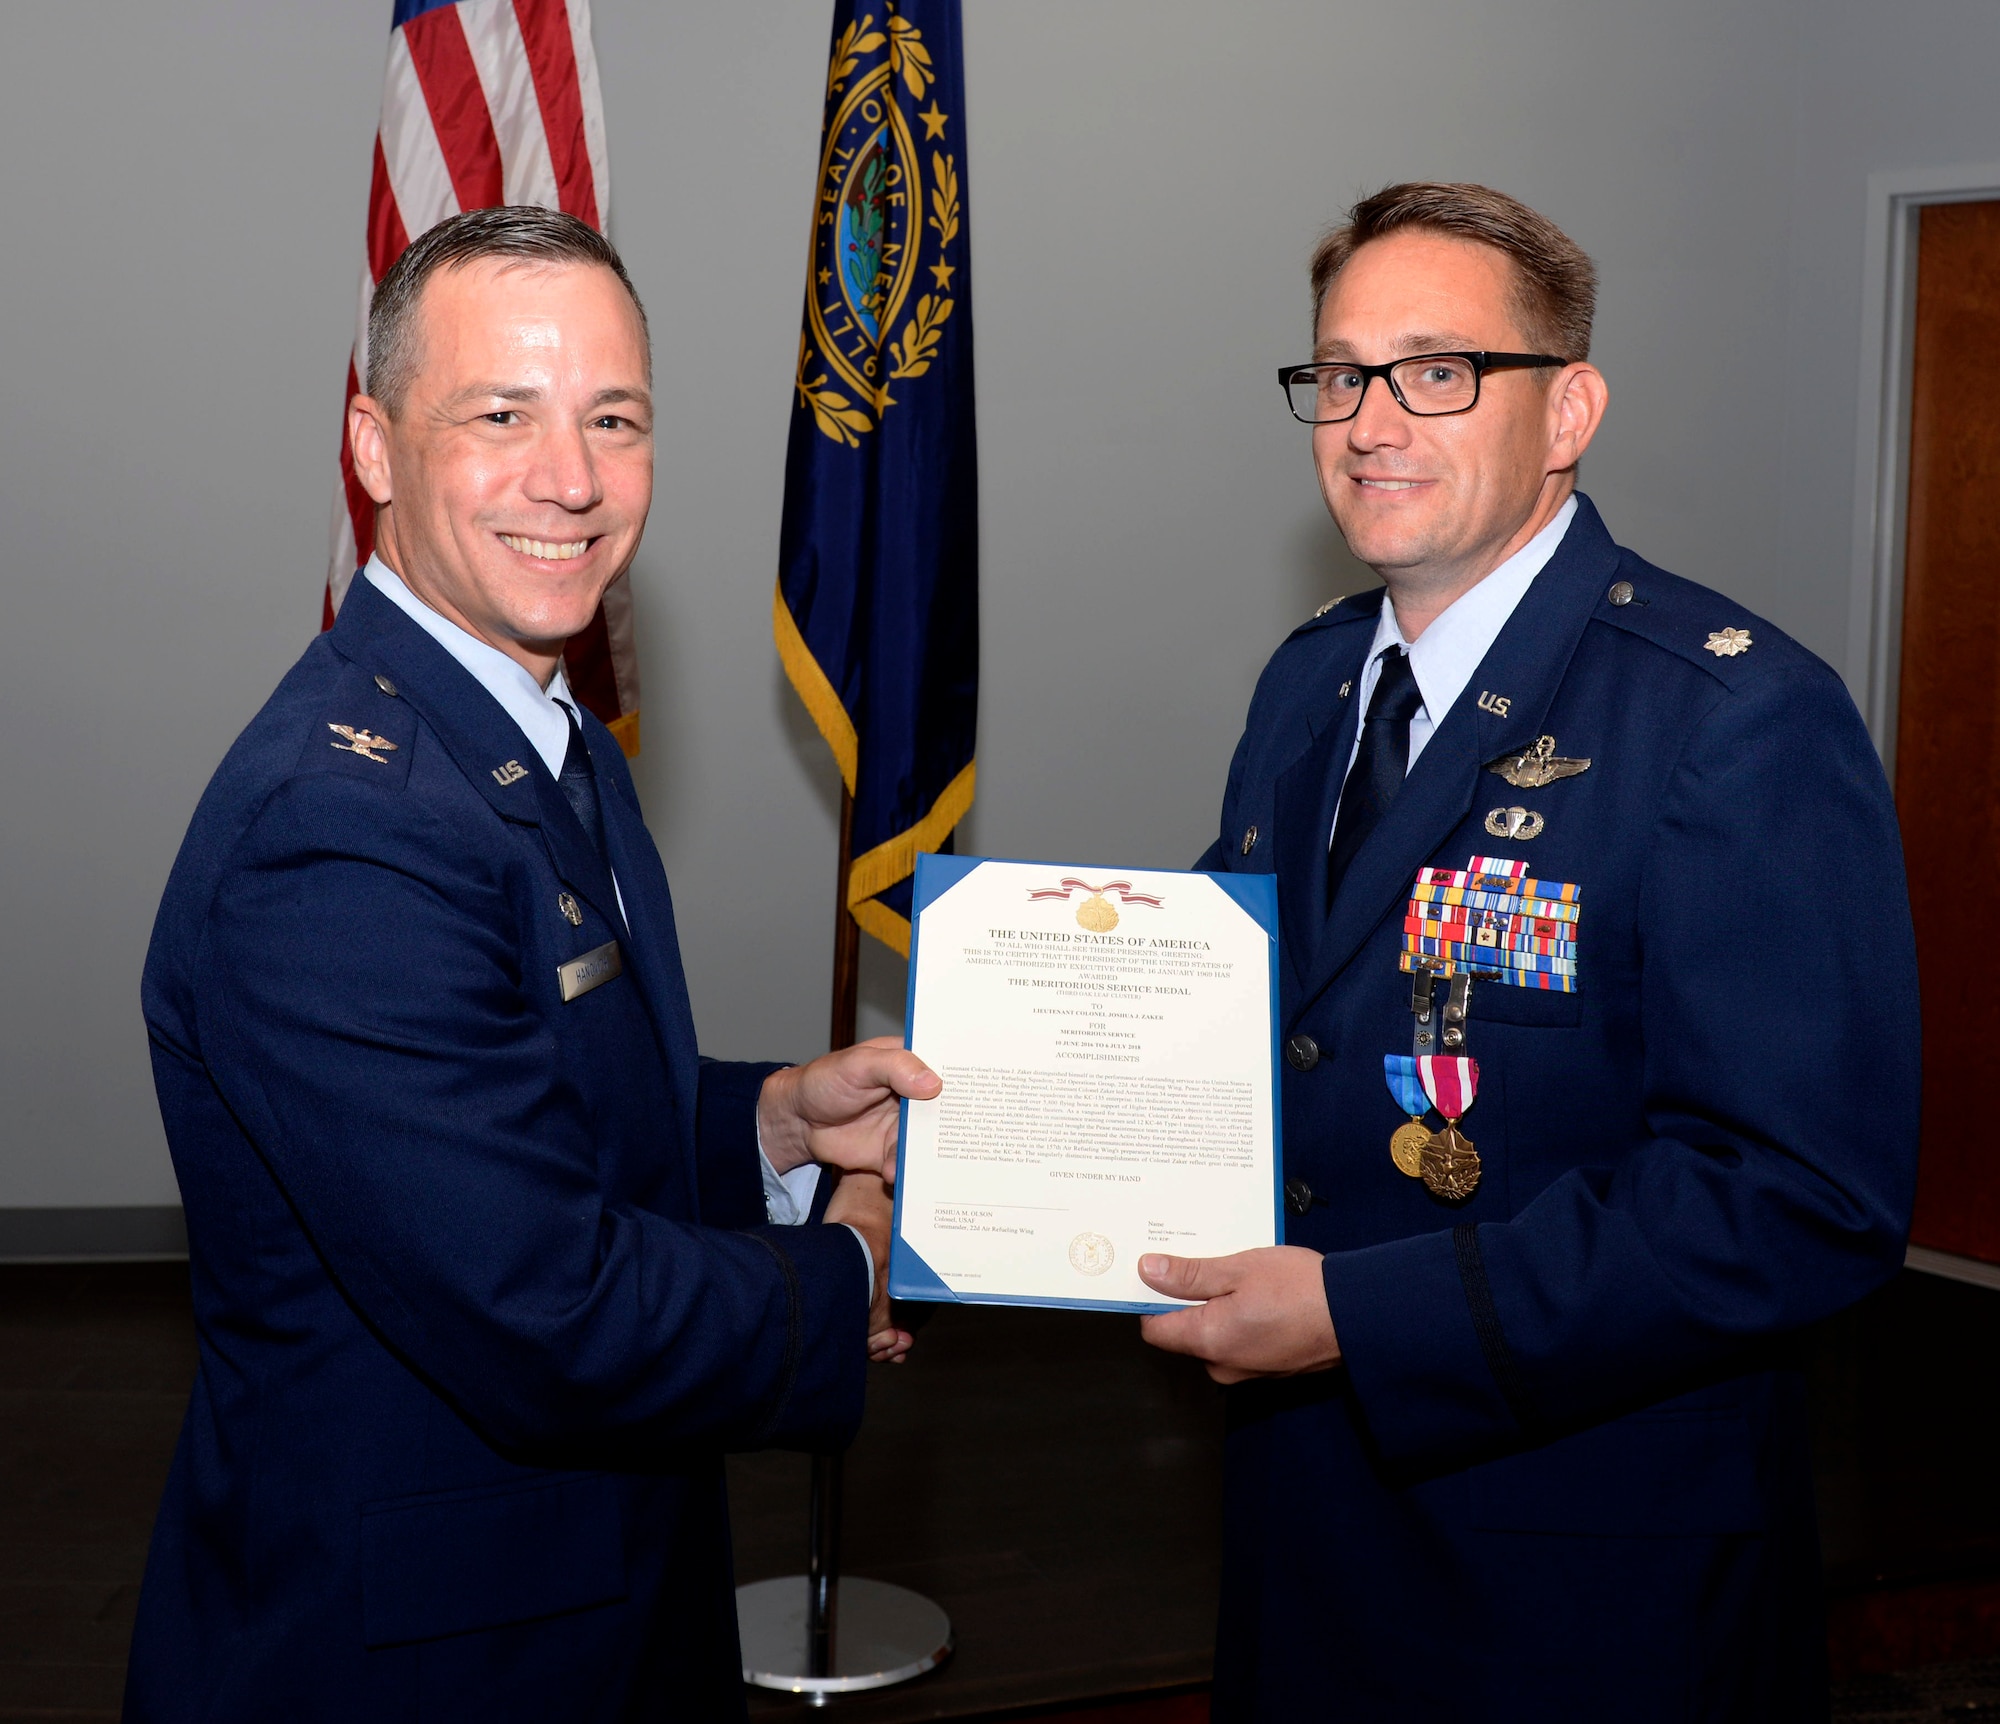 Lt. Col. Joshua J. Zaker, commander of the 64th Air Refueling Squadron, receives a Meritorious Service Medal certificate from Col. Robert L. Hanovich JR, commander of the 22nd Operations Group at McConnell Air Force Base, Kan. during a ceremony on July 6, 2018 at Pease Air National Guard Base, N.H. Zaker relinquished command of the 64th ARS after more than three years as the commander. (N.H. Air National Guard photo by Staff Sgt. Kayla White)